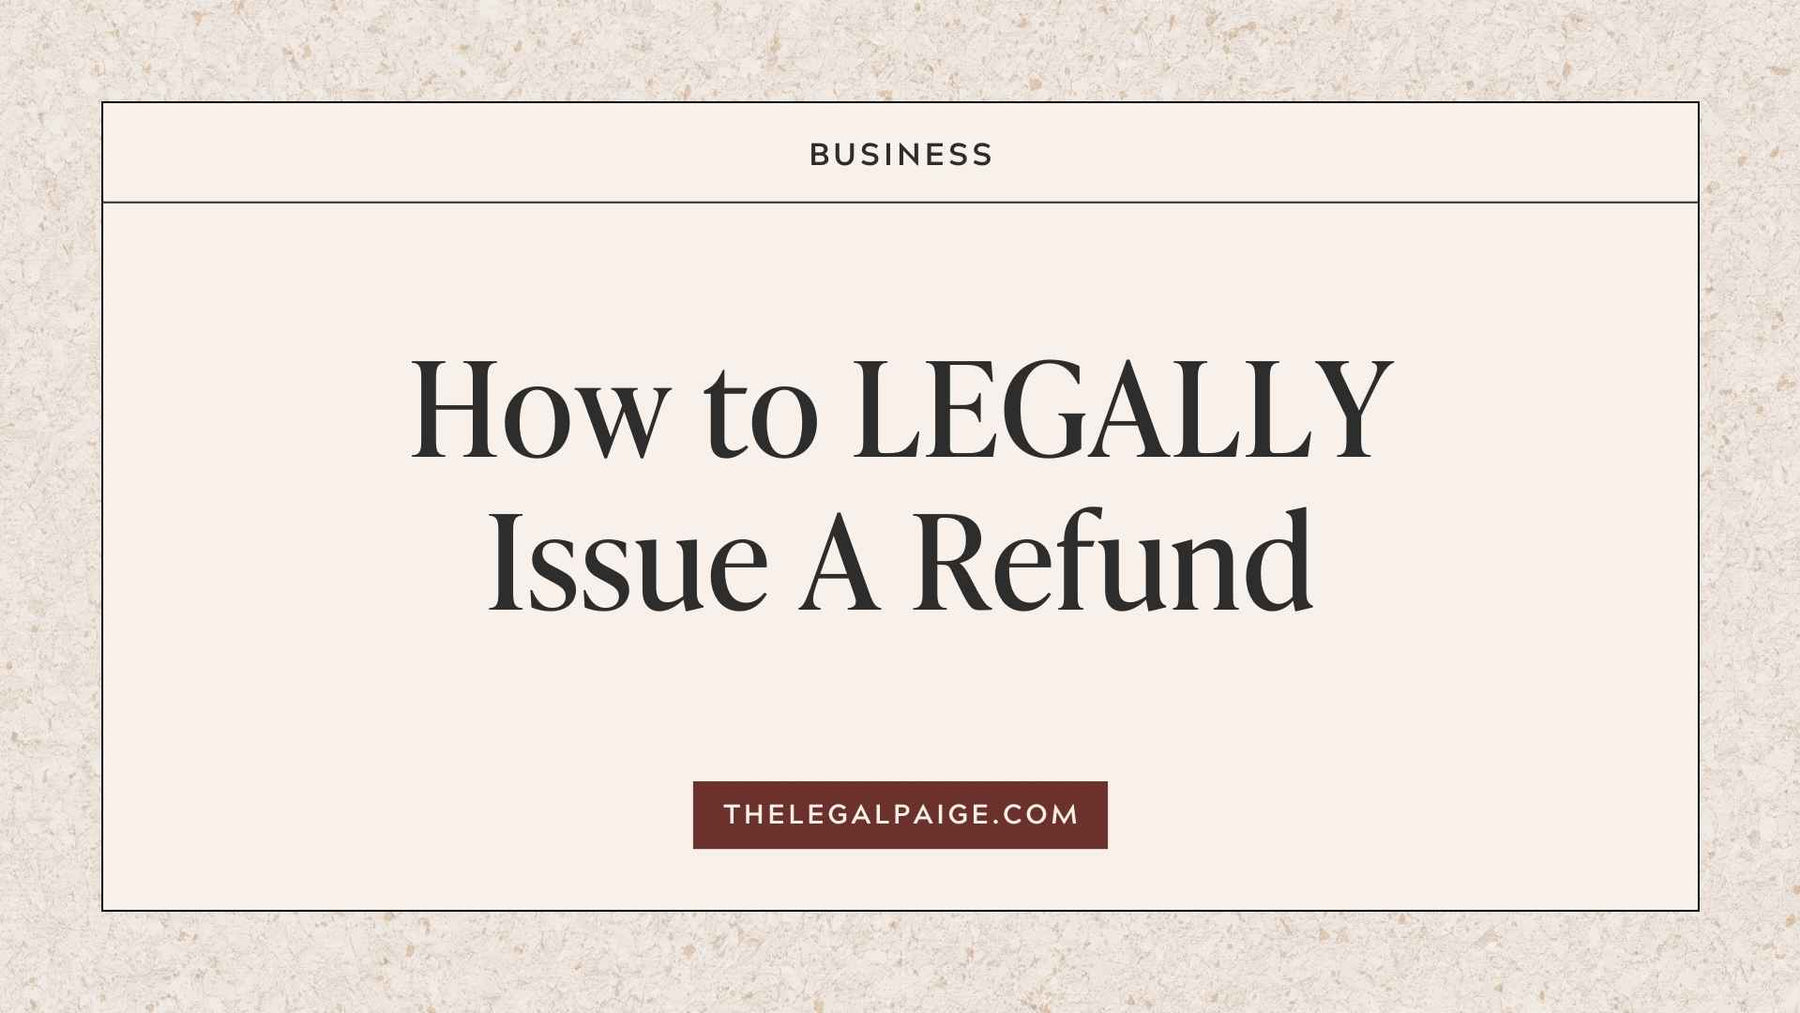 How to LEGALLY Issue A Refund